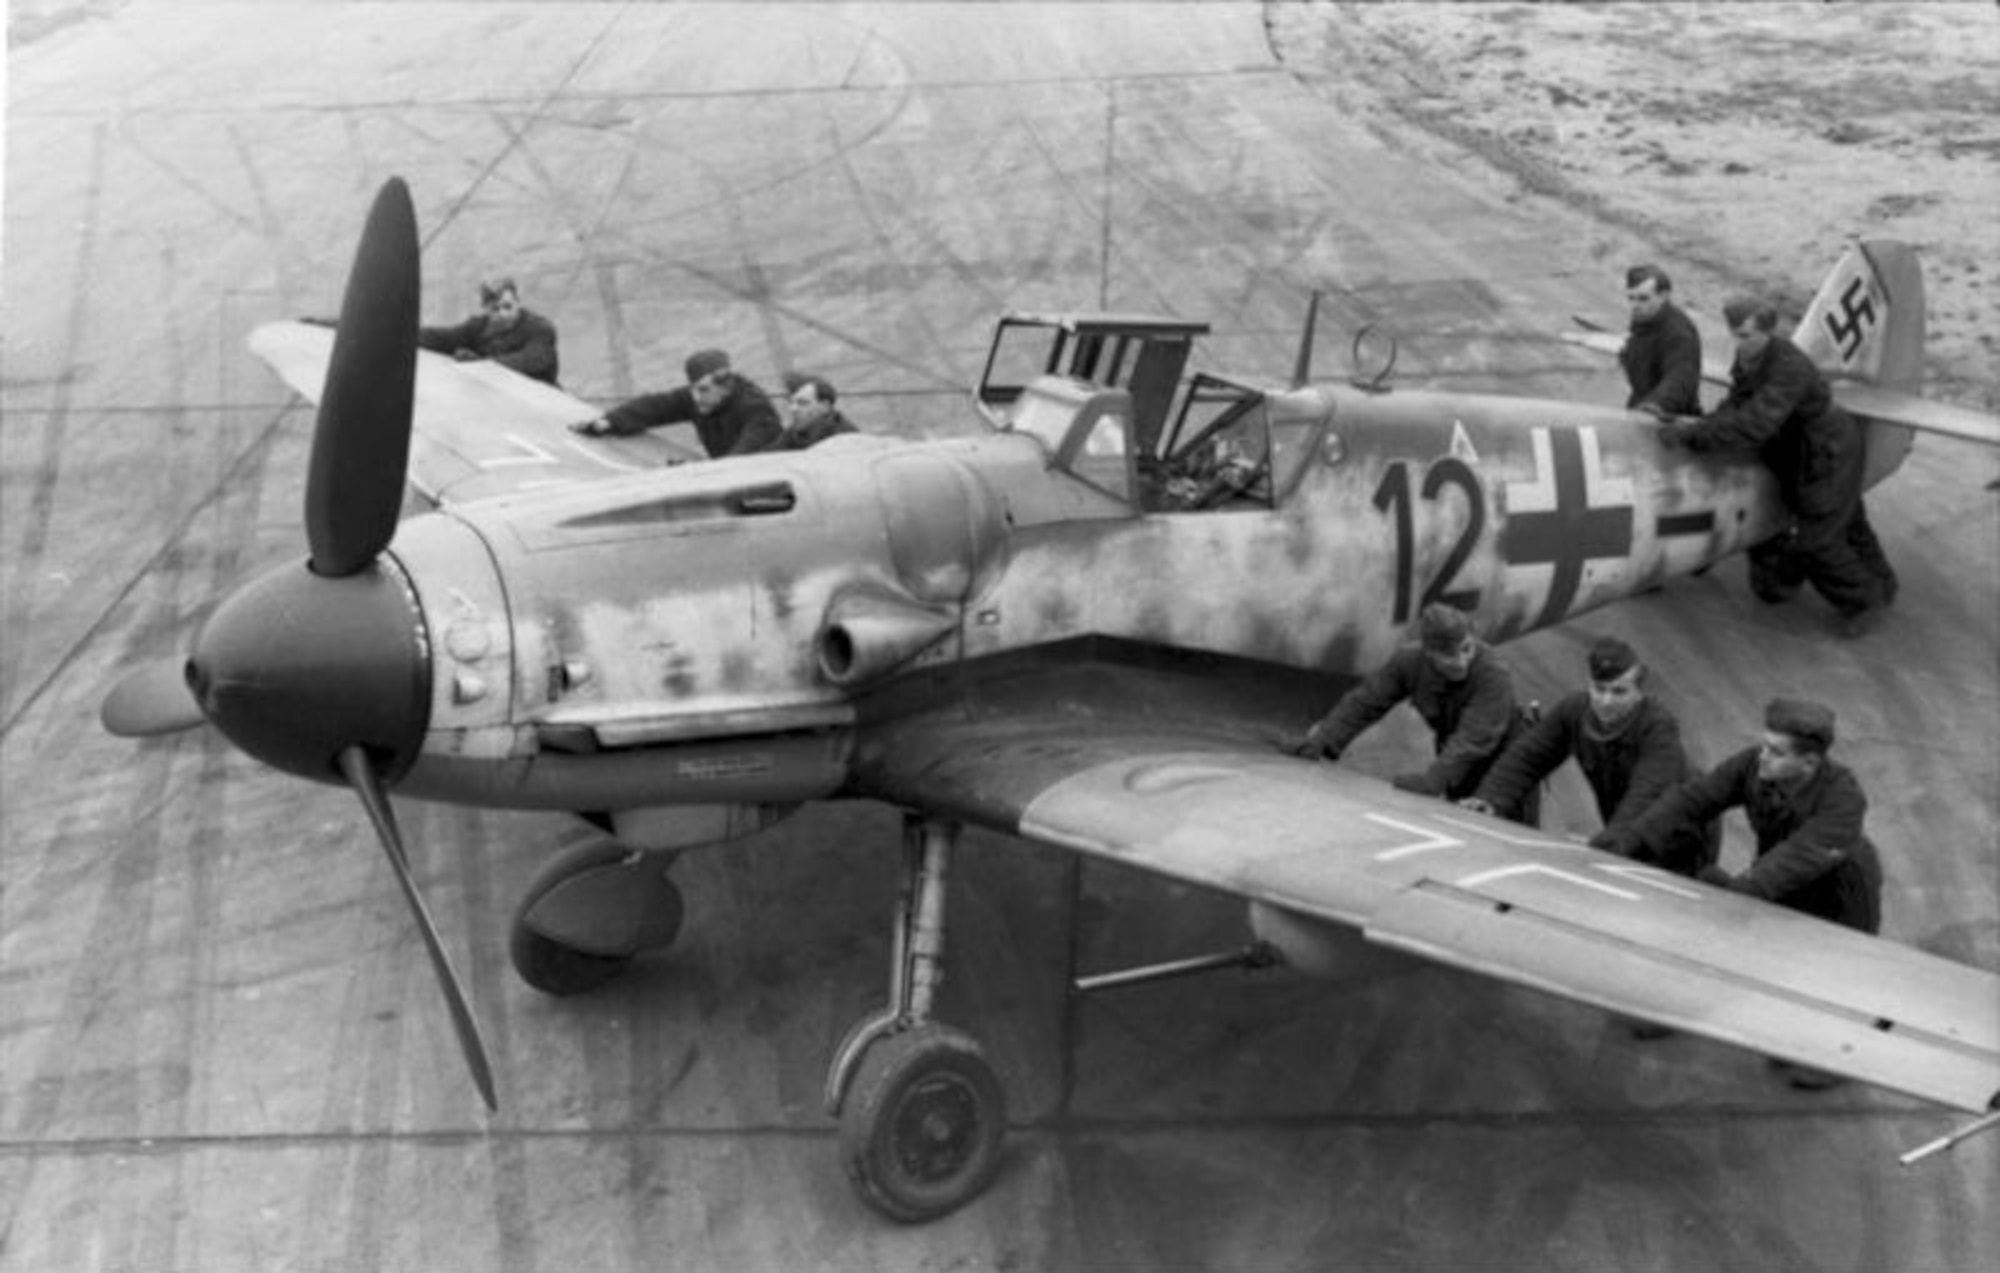 Luftwaffe ground crew positioning a Messerschmitt Bf 109G-6 equipped with an underwing gondola cannon kit, assigned to a Luftwaffe squadron in France, late 1943. The cannon was especially effective in attacking American strategic bombers. This aircraft was one of several types of German fighters that engaged B-17 bombers and P-51 fighters during Operation Argument. (Archive photo)